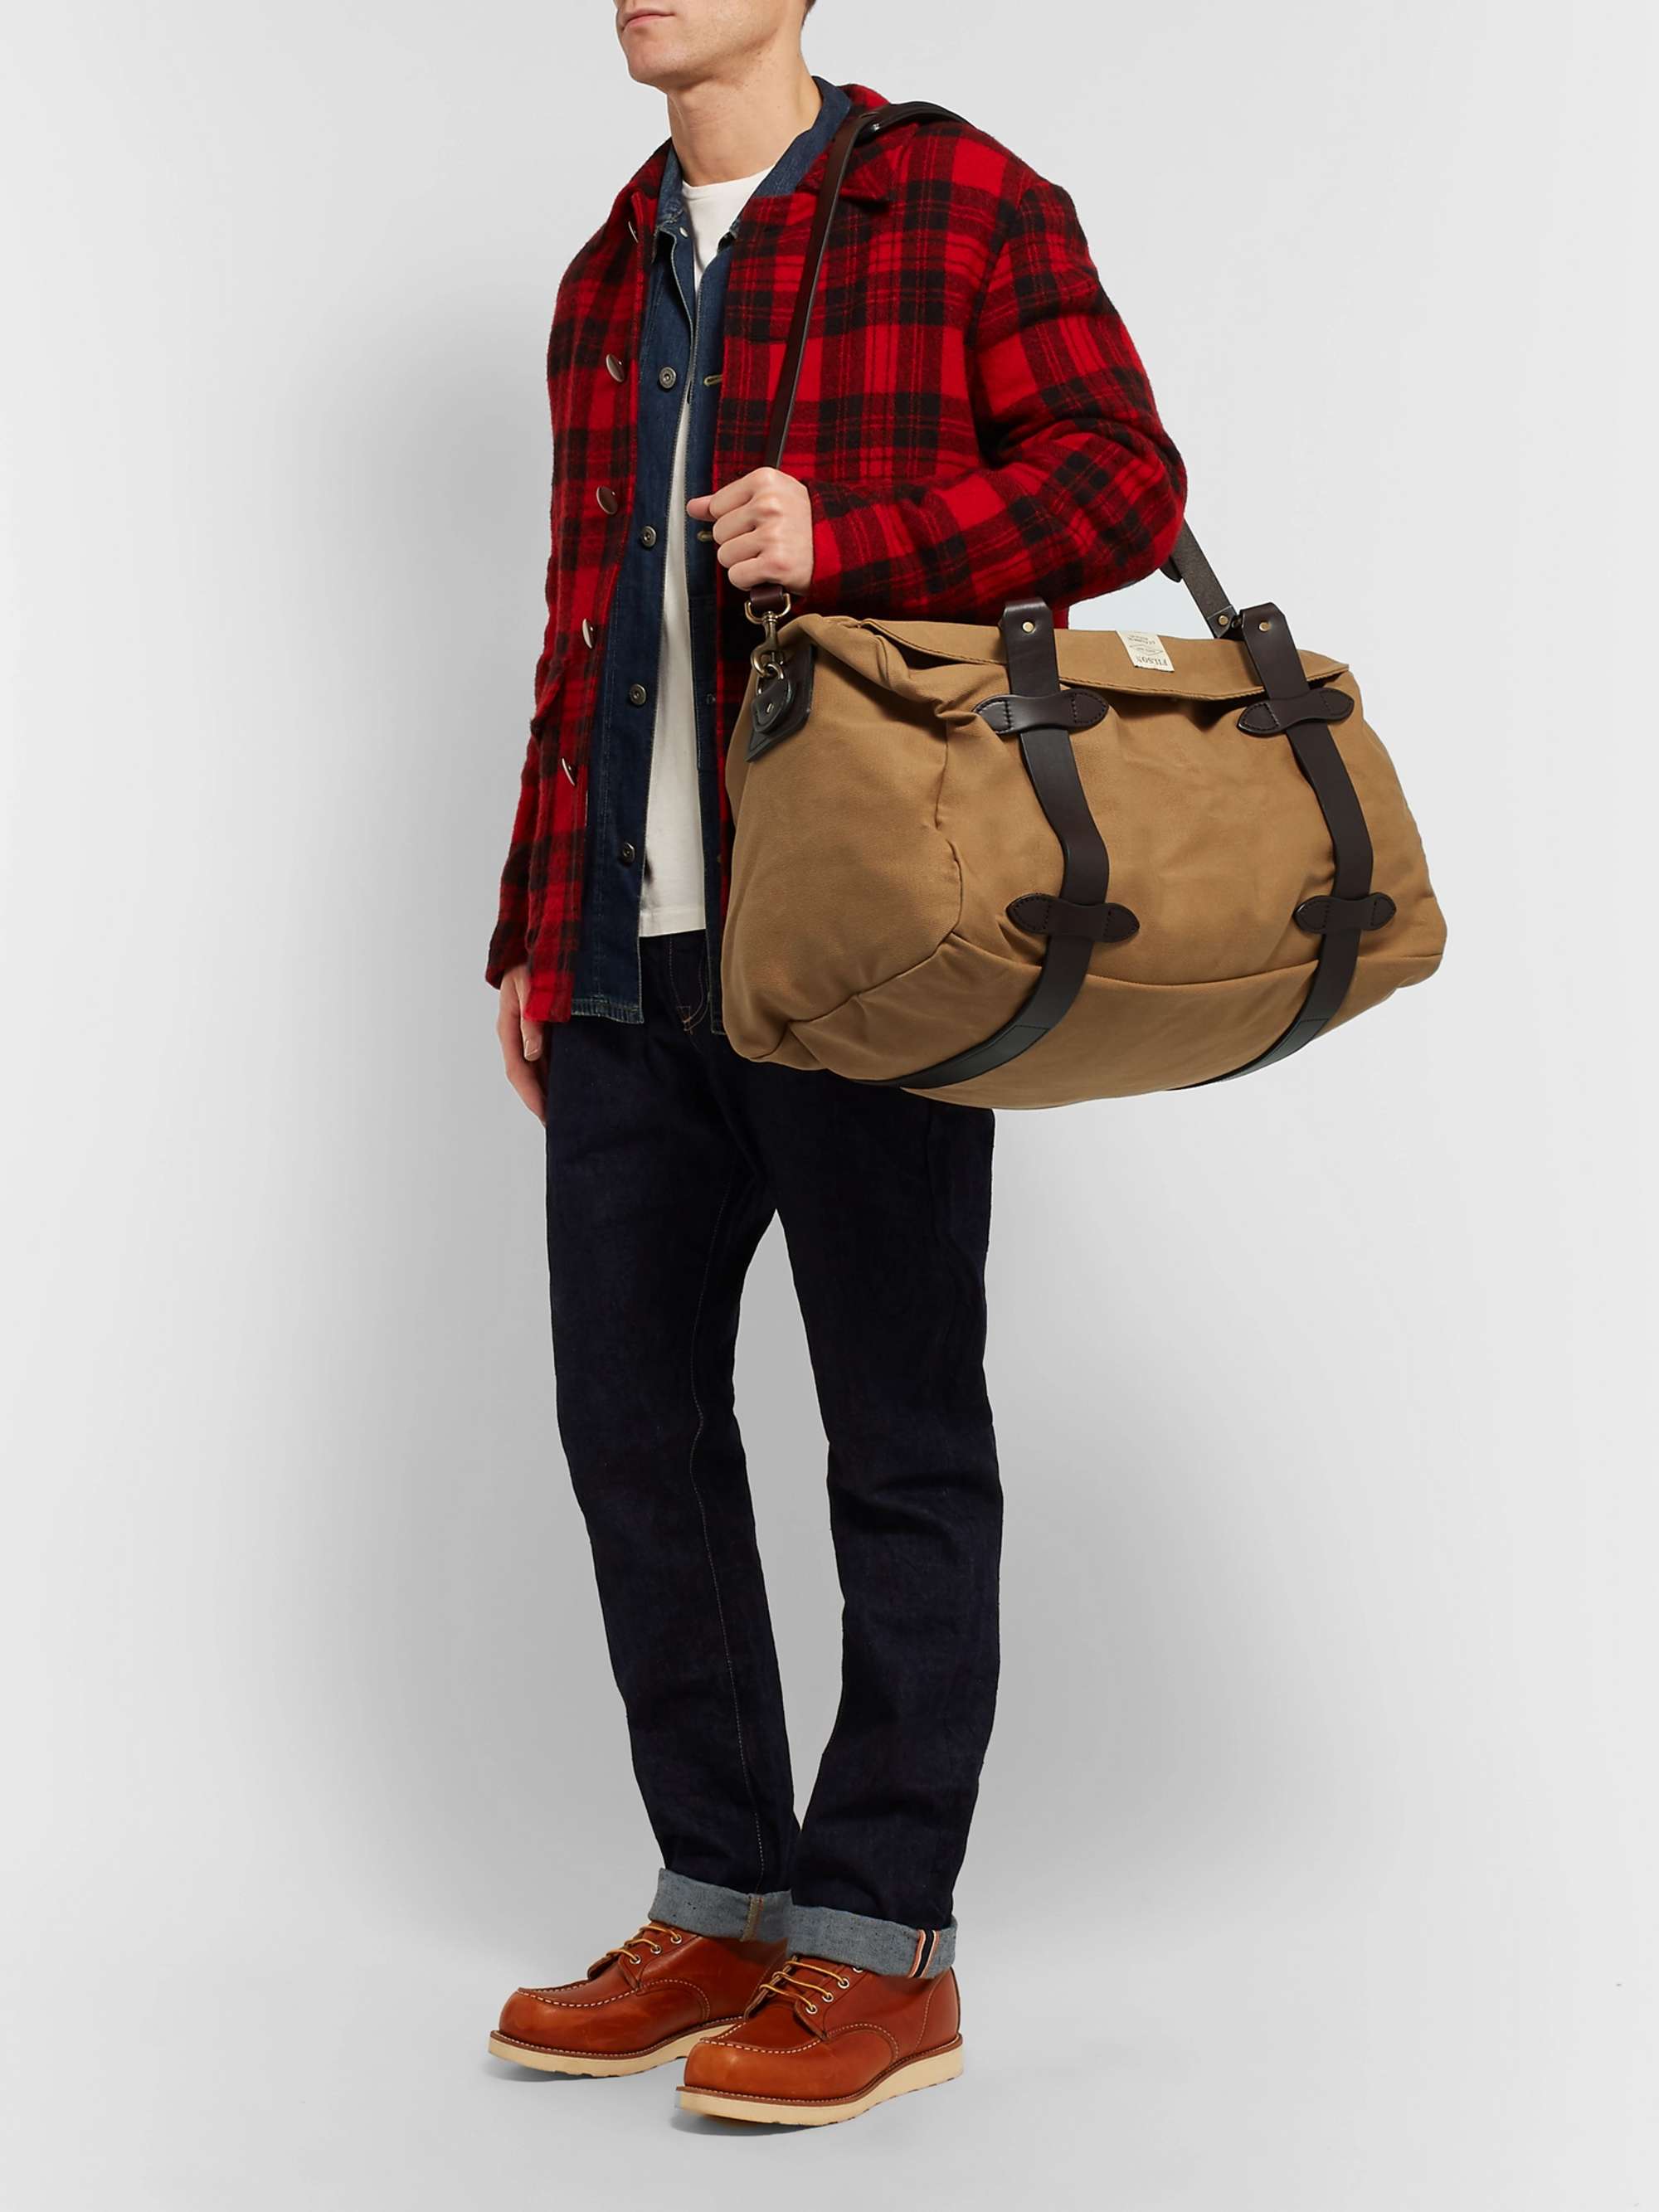 FILSON Leather-Trimmed Twill Duffle Bag